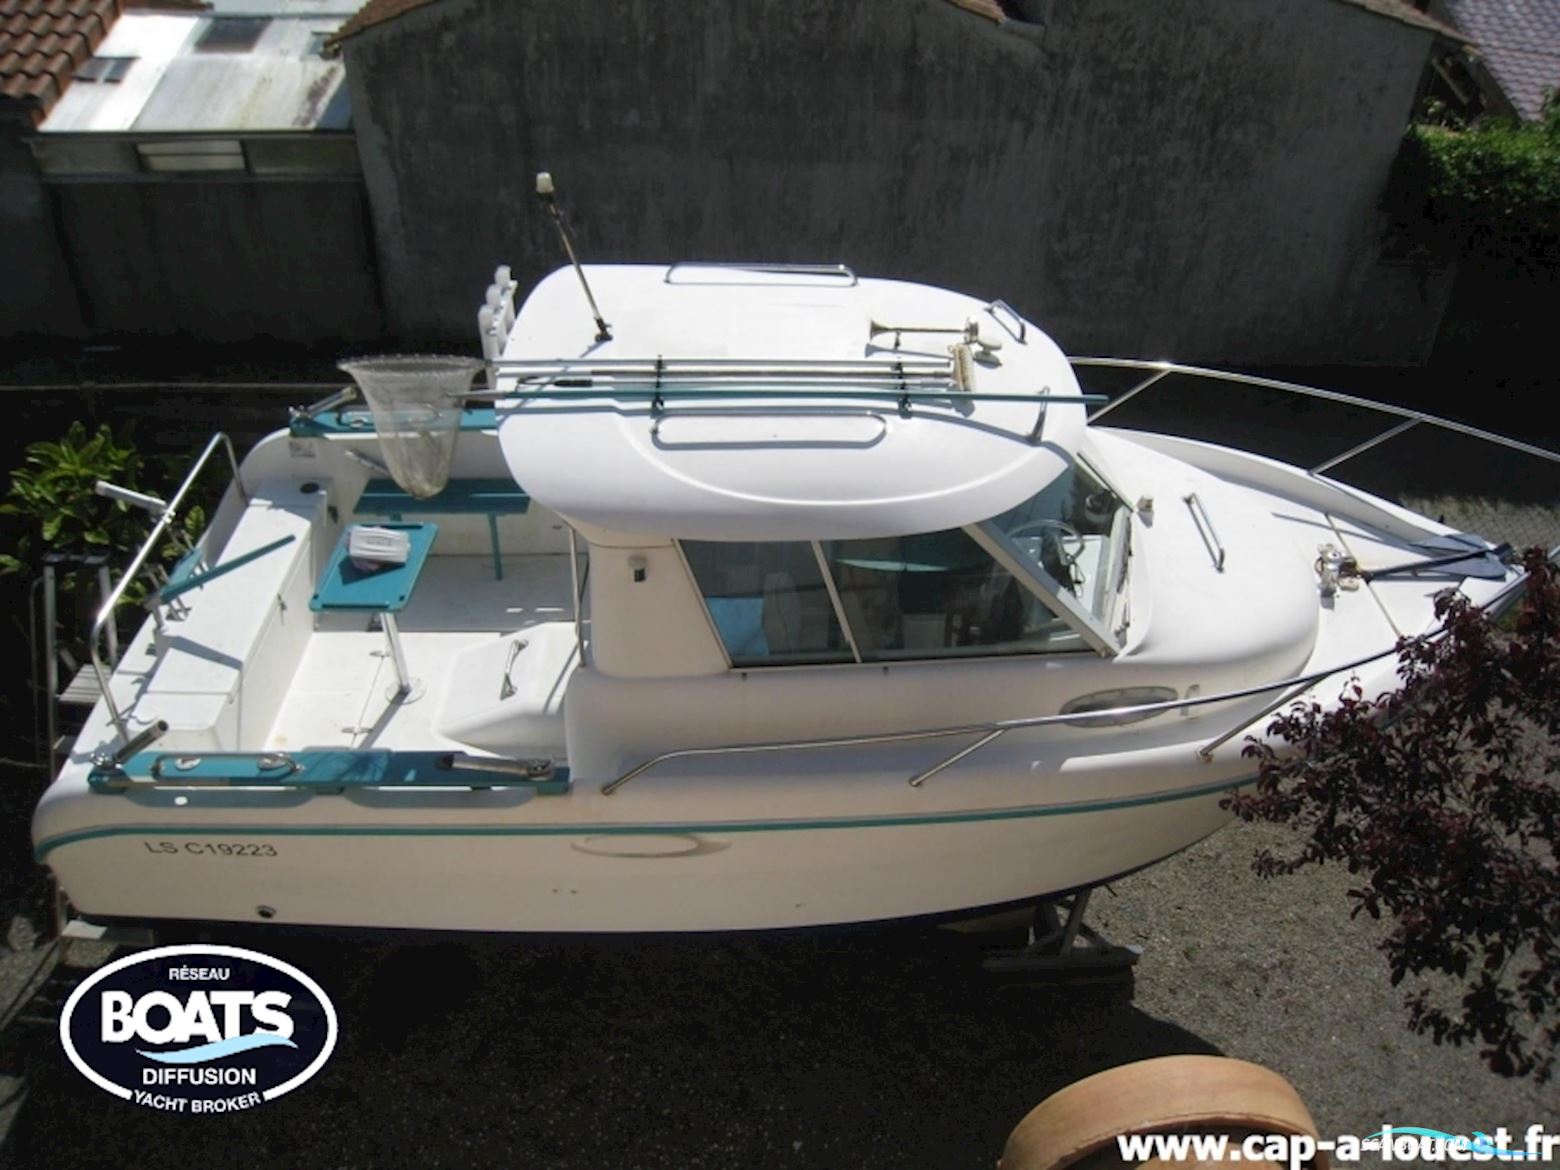 Ocqueteau 645 Motor boat 2003, with Nannidiesel engine, France